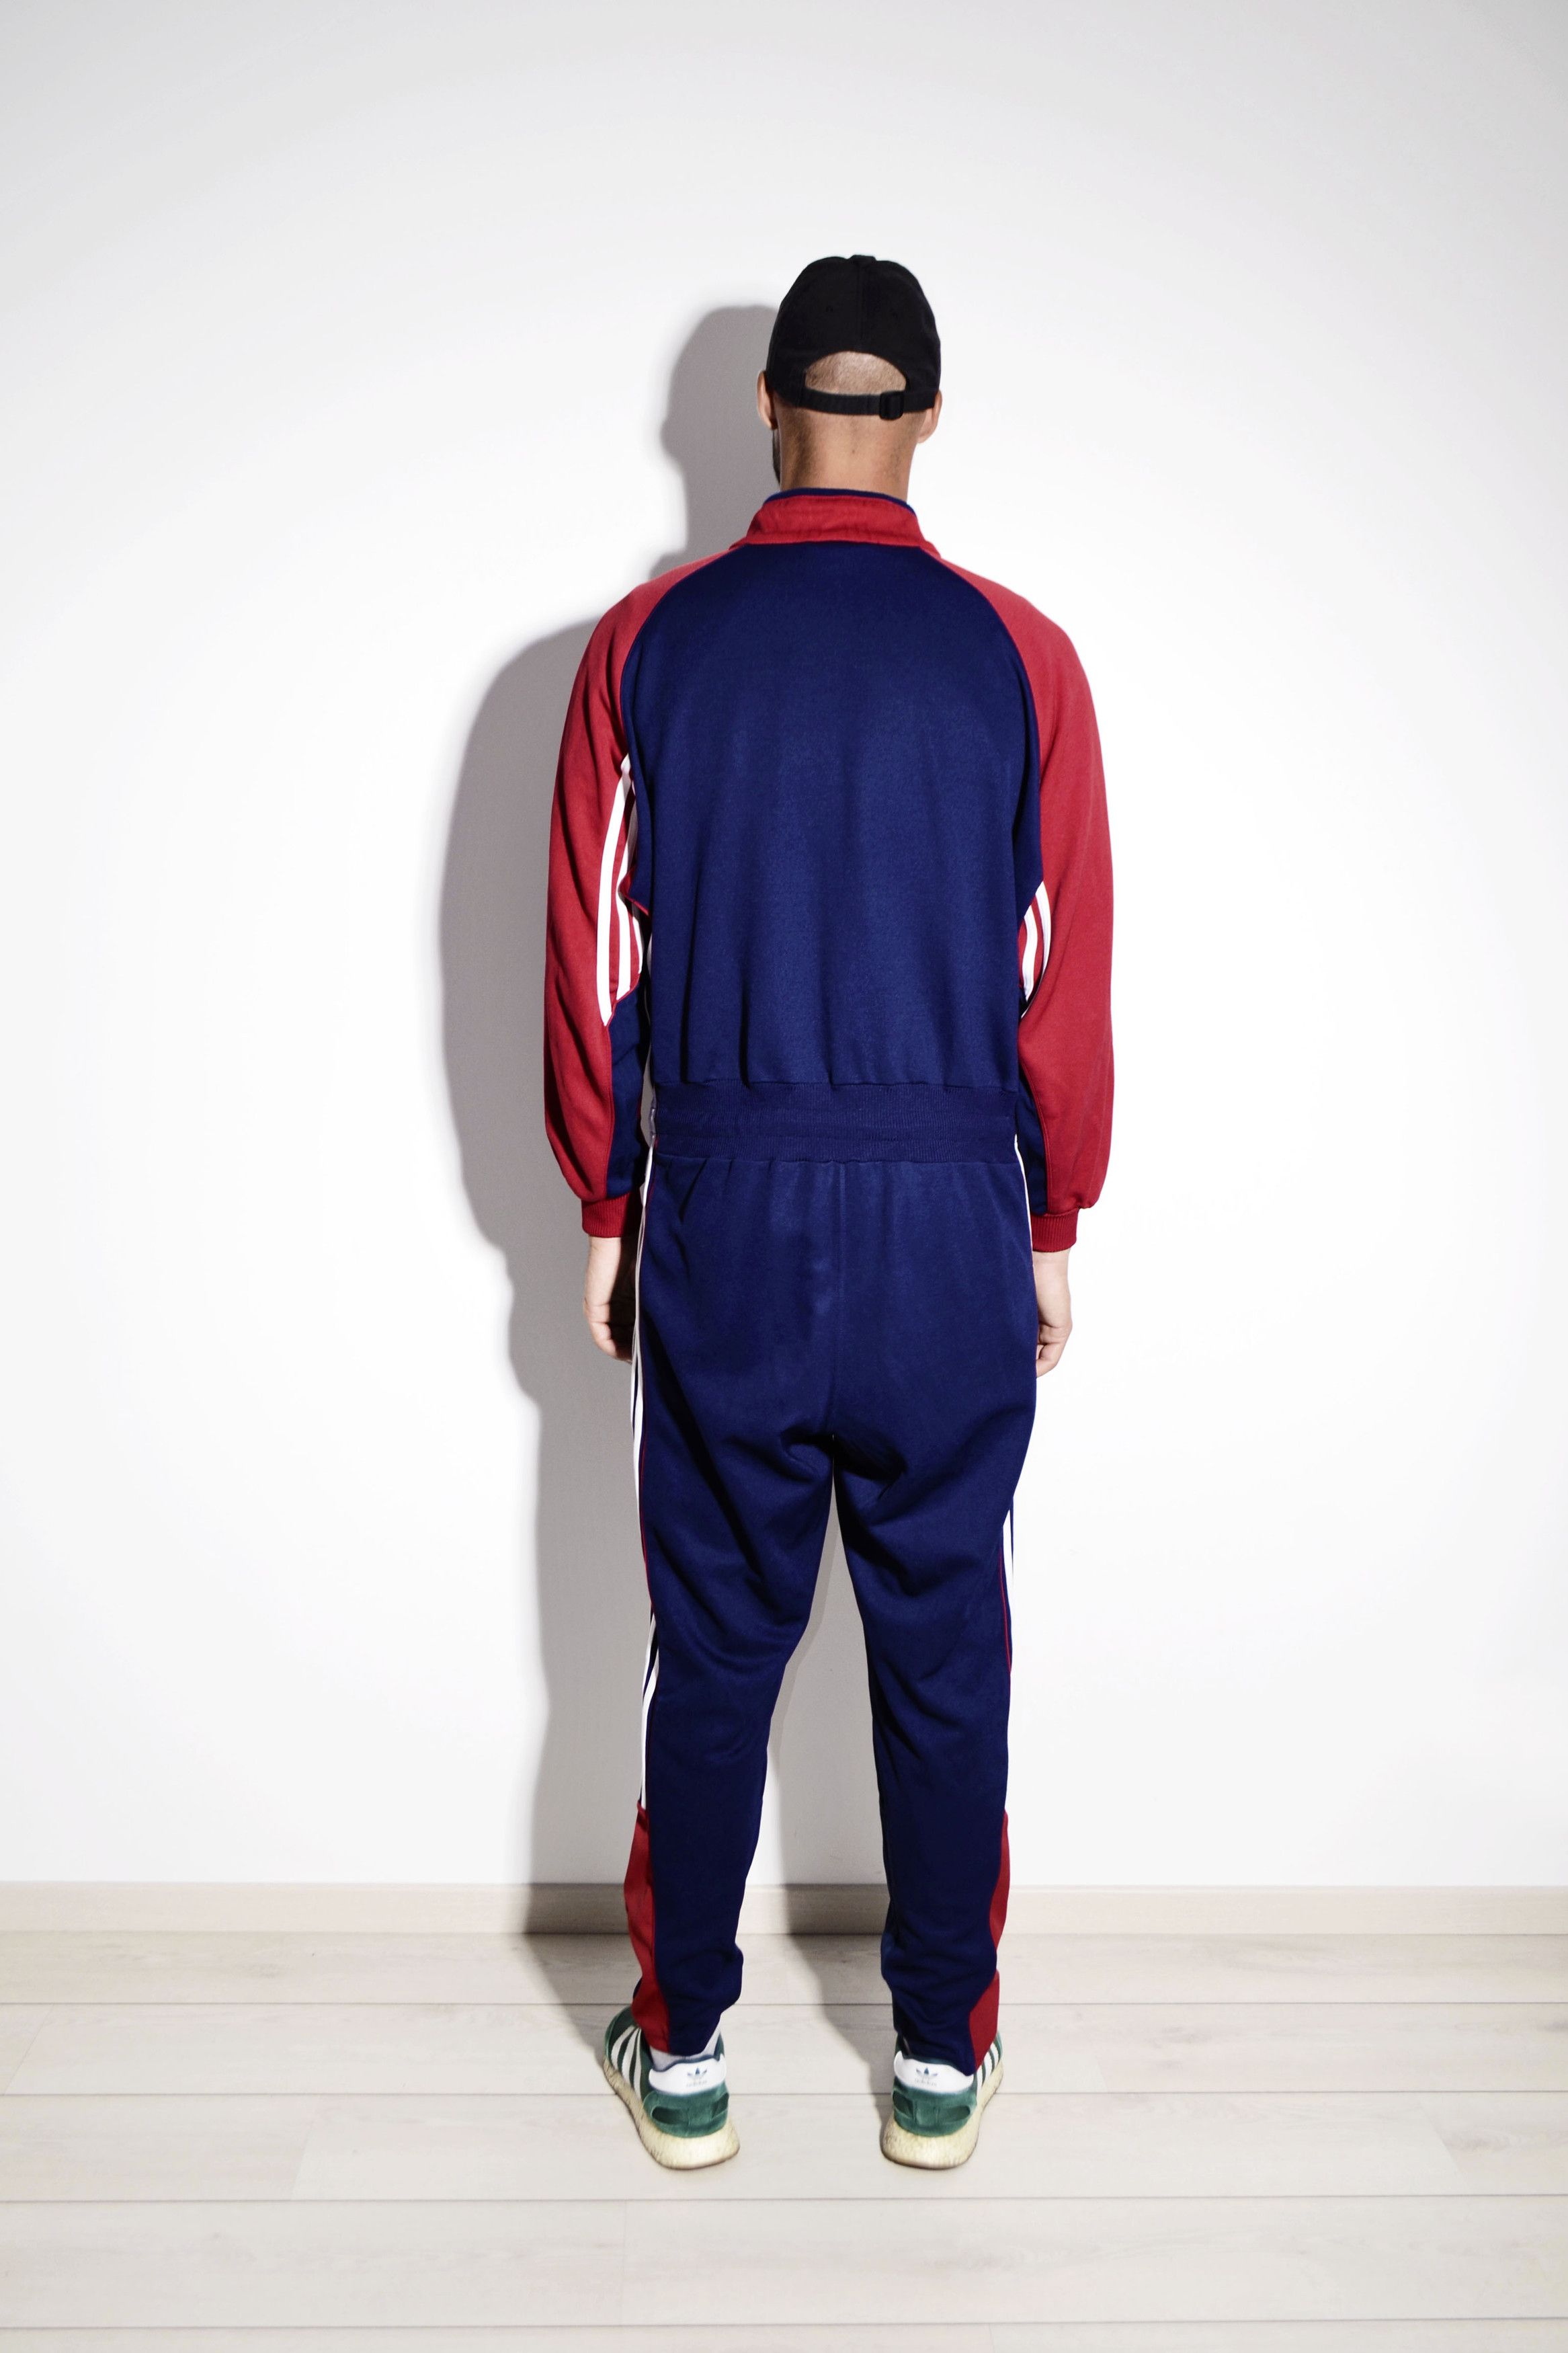 Adidas Vintage men sport onesie ADIDAS | 80s retro Old School overall full coverall jumpsuit sweatsuit one part piece tracksuit blue red | Large Size US 34 / EU 50 - 3 Thumbnail